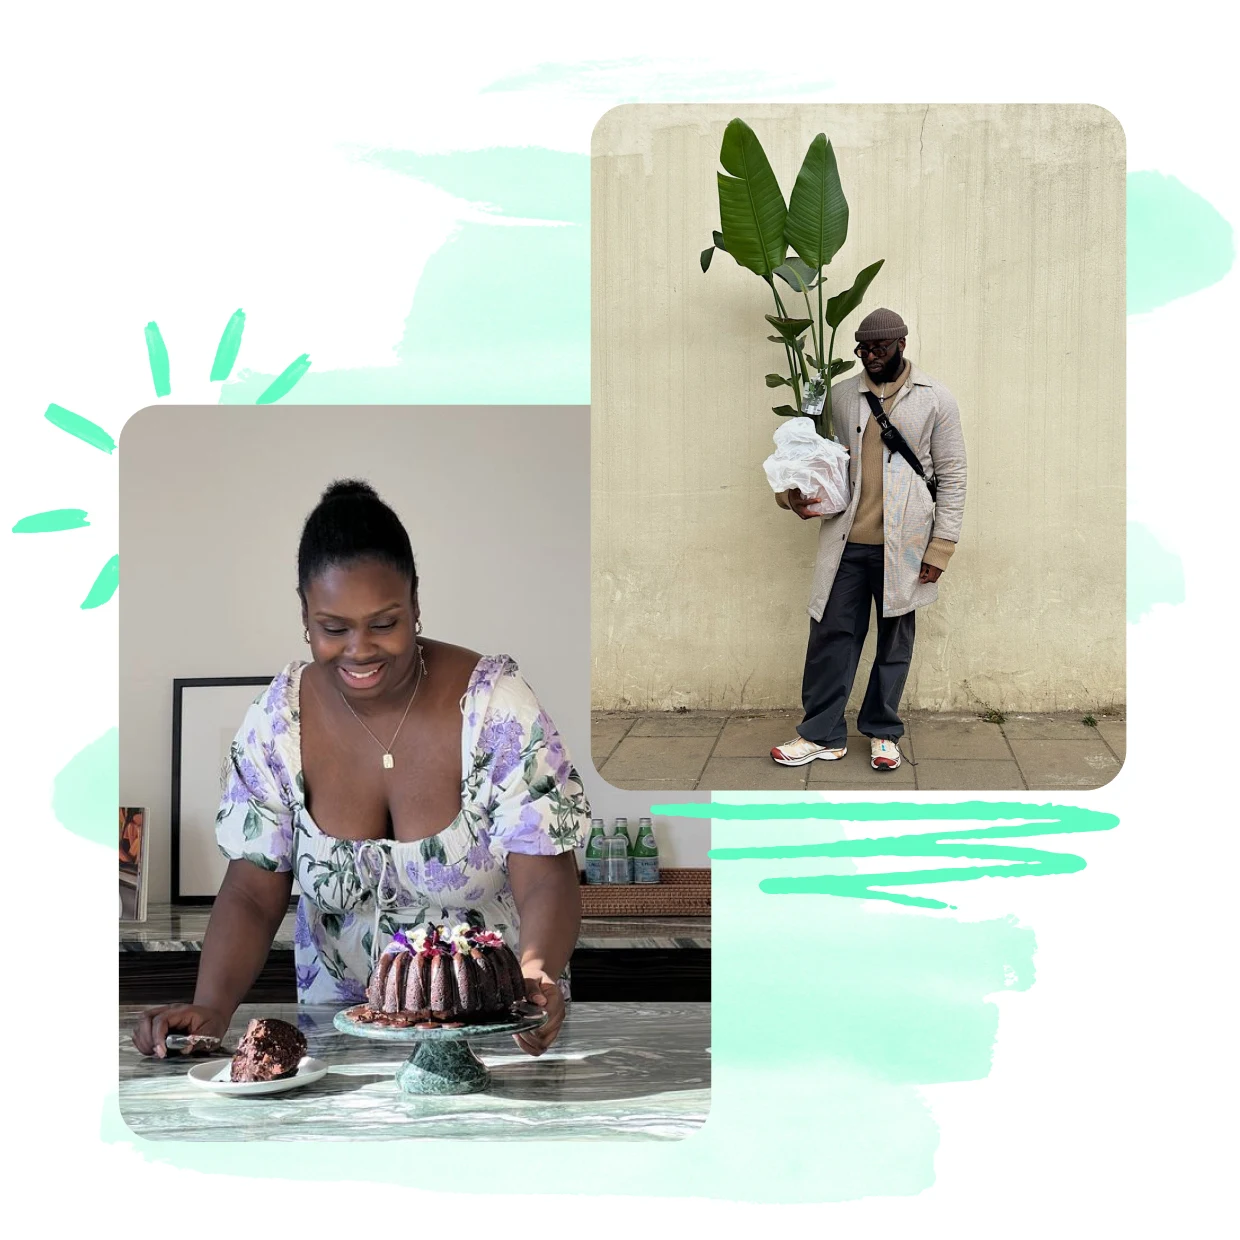 Two showing two creators. One of a woman decorating a cake, the other a man holding a plant.